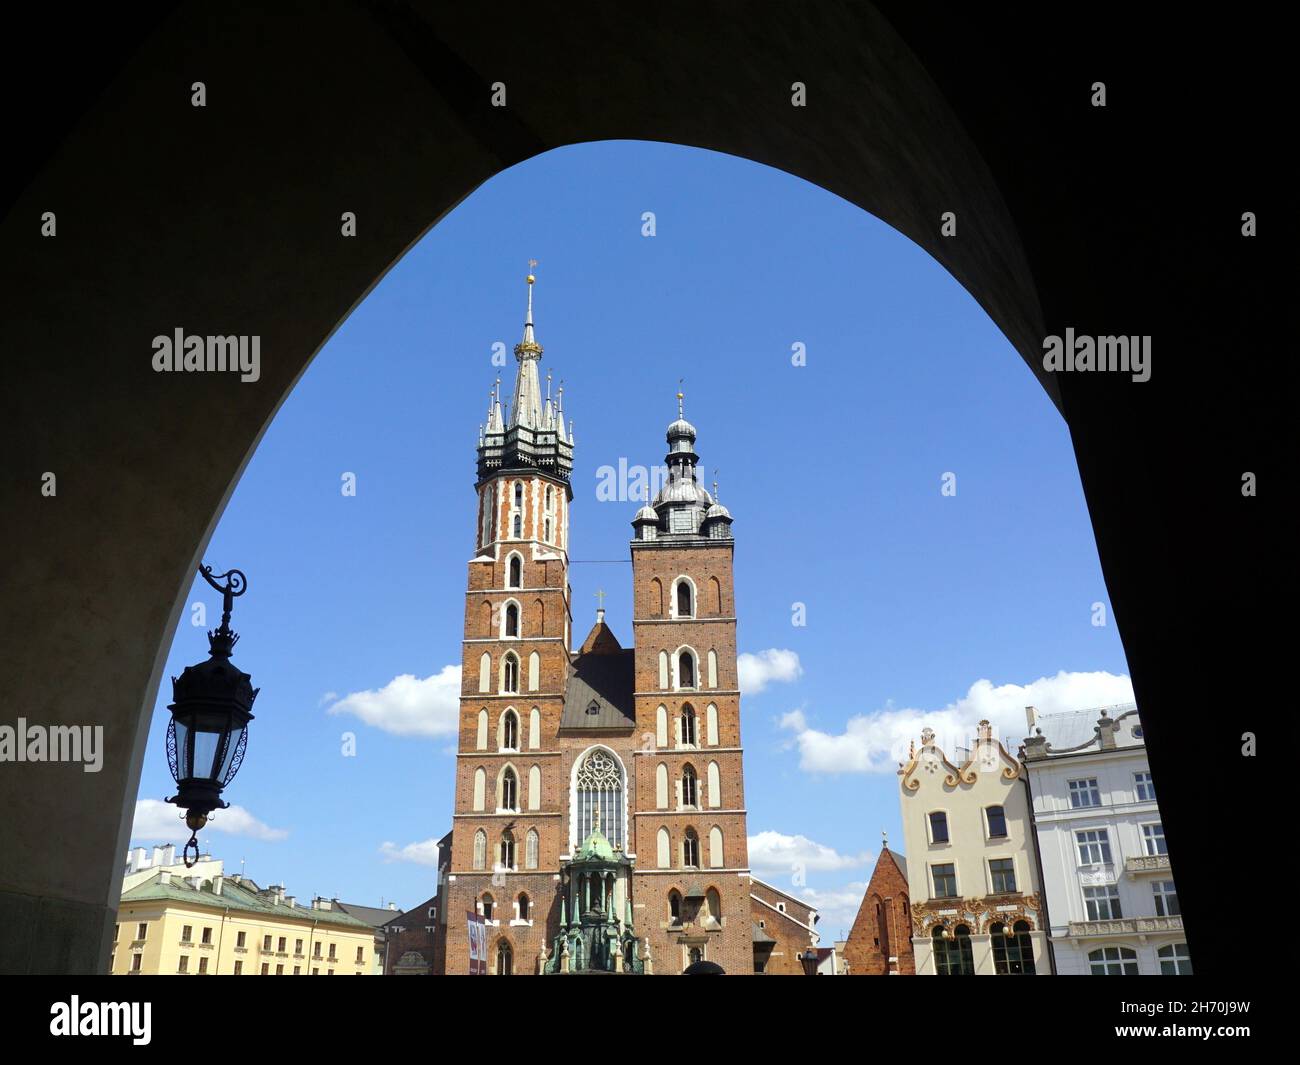 St Mary`s Basilica or Mariacki Church, a symbol of Krakow and one of the most famous landmarks in Poland Stock Photo